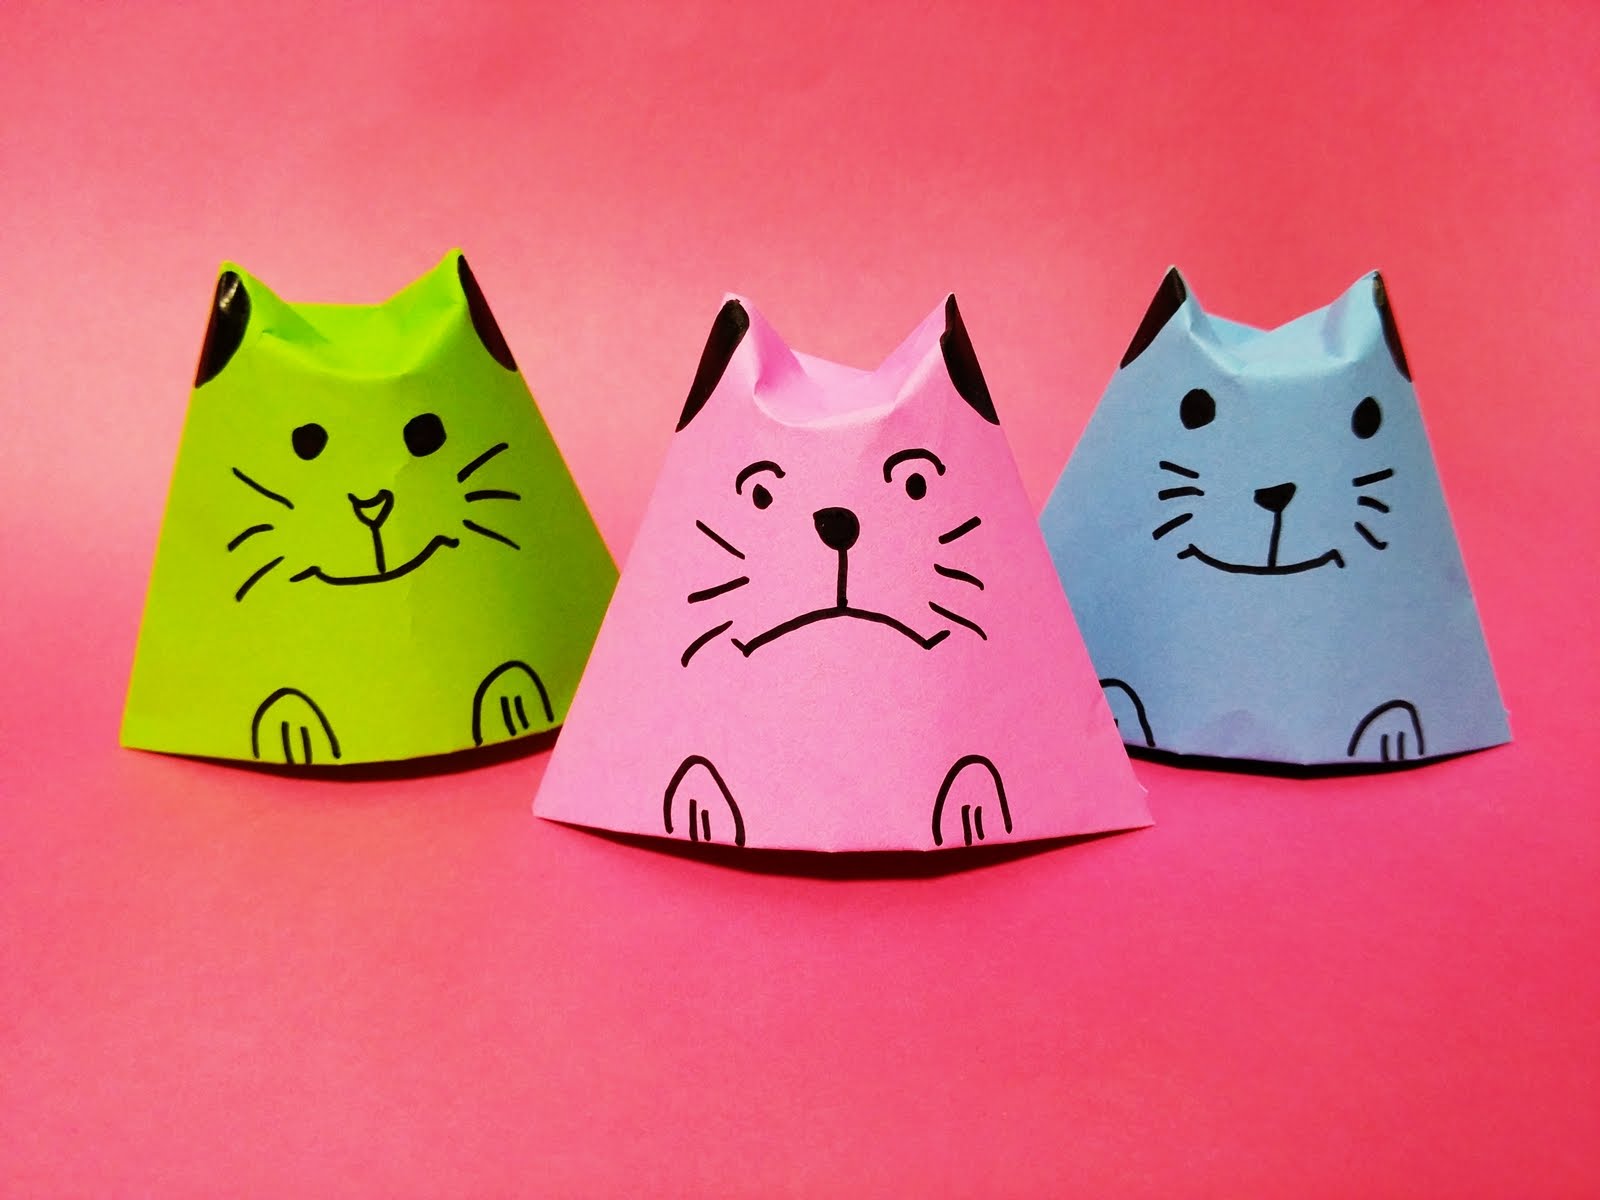 An image of three simple origami cats